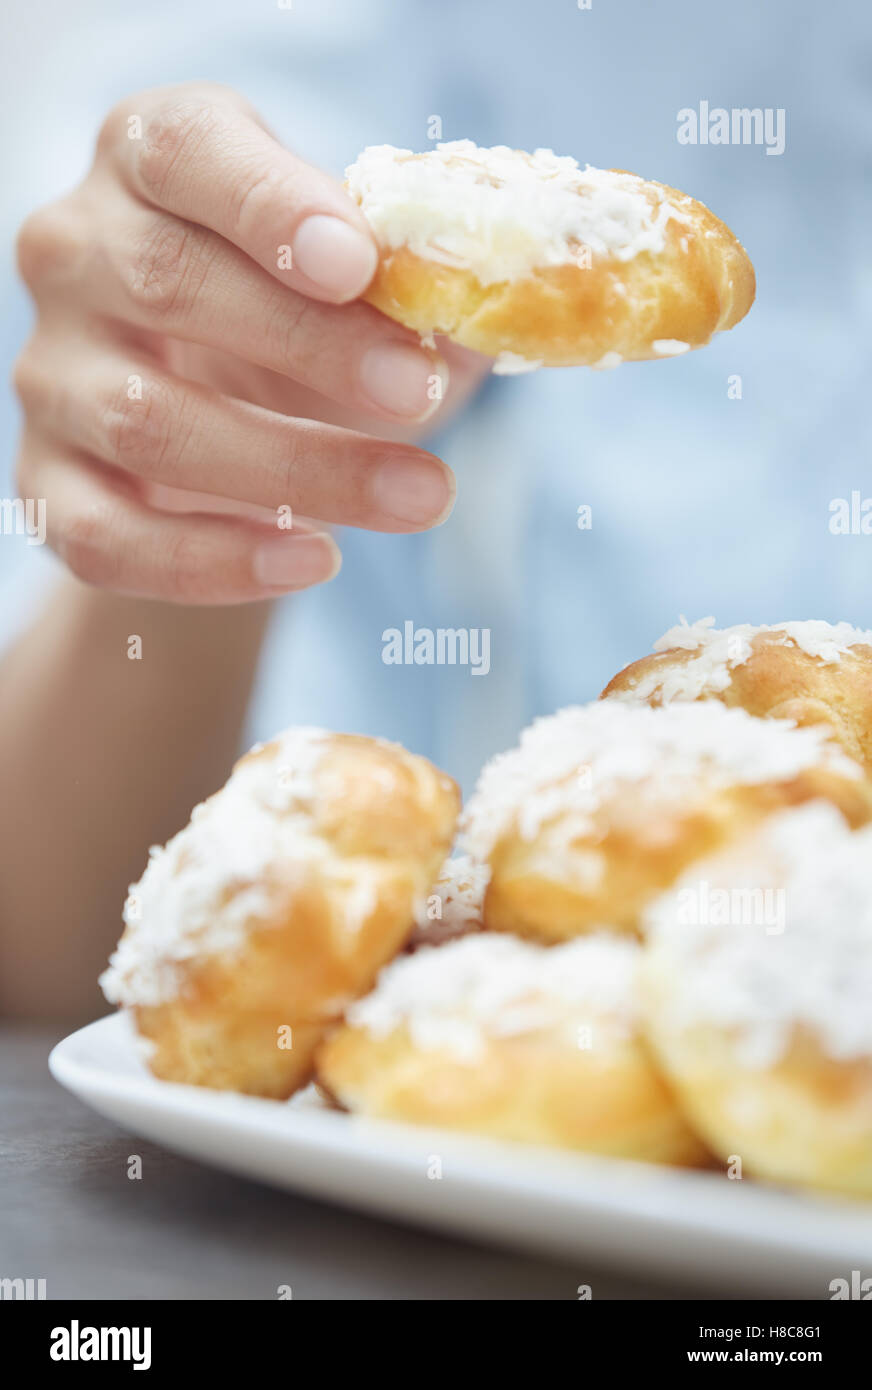 Woman eating eclairs at home. Vertical photos Stock Photo